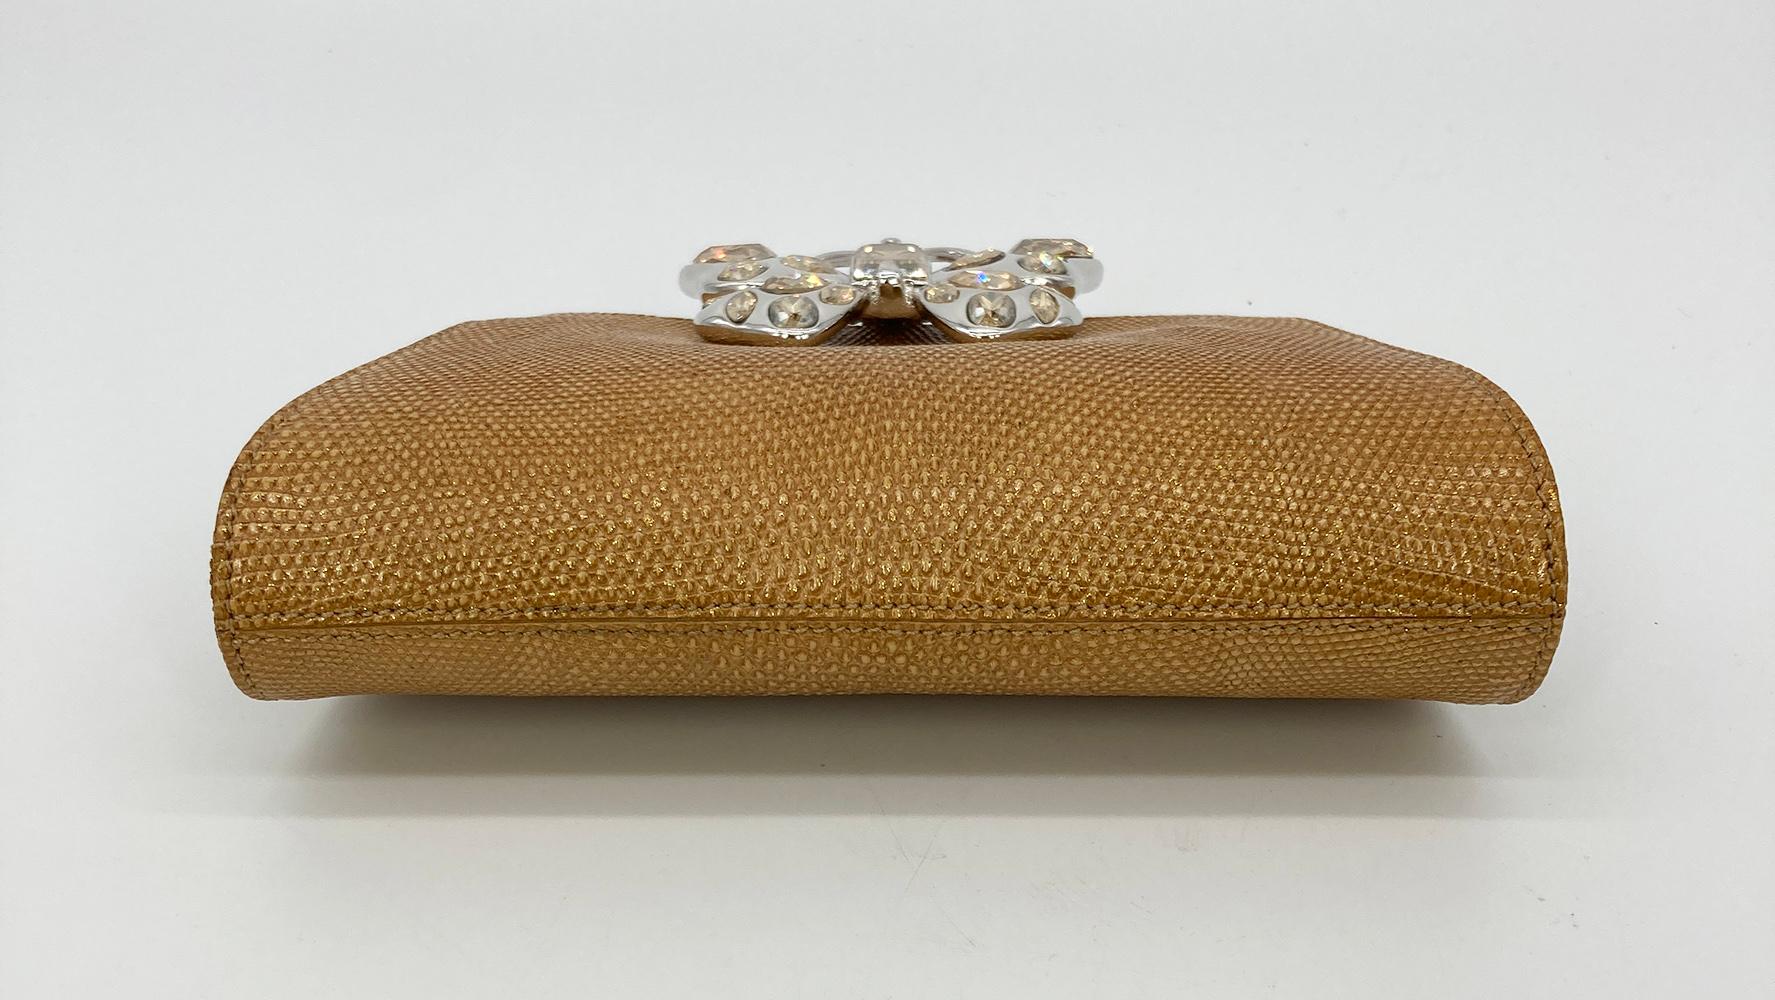 Judith Leiber Metallic Lizard Butterfly Clutch In Excellent Condition For Sale In Philadelphia, PA